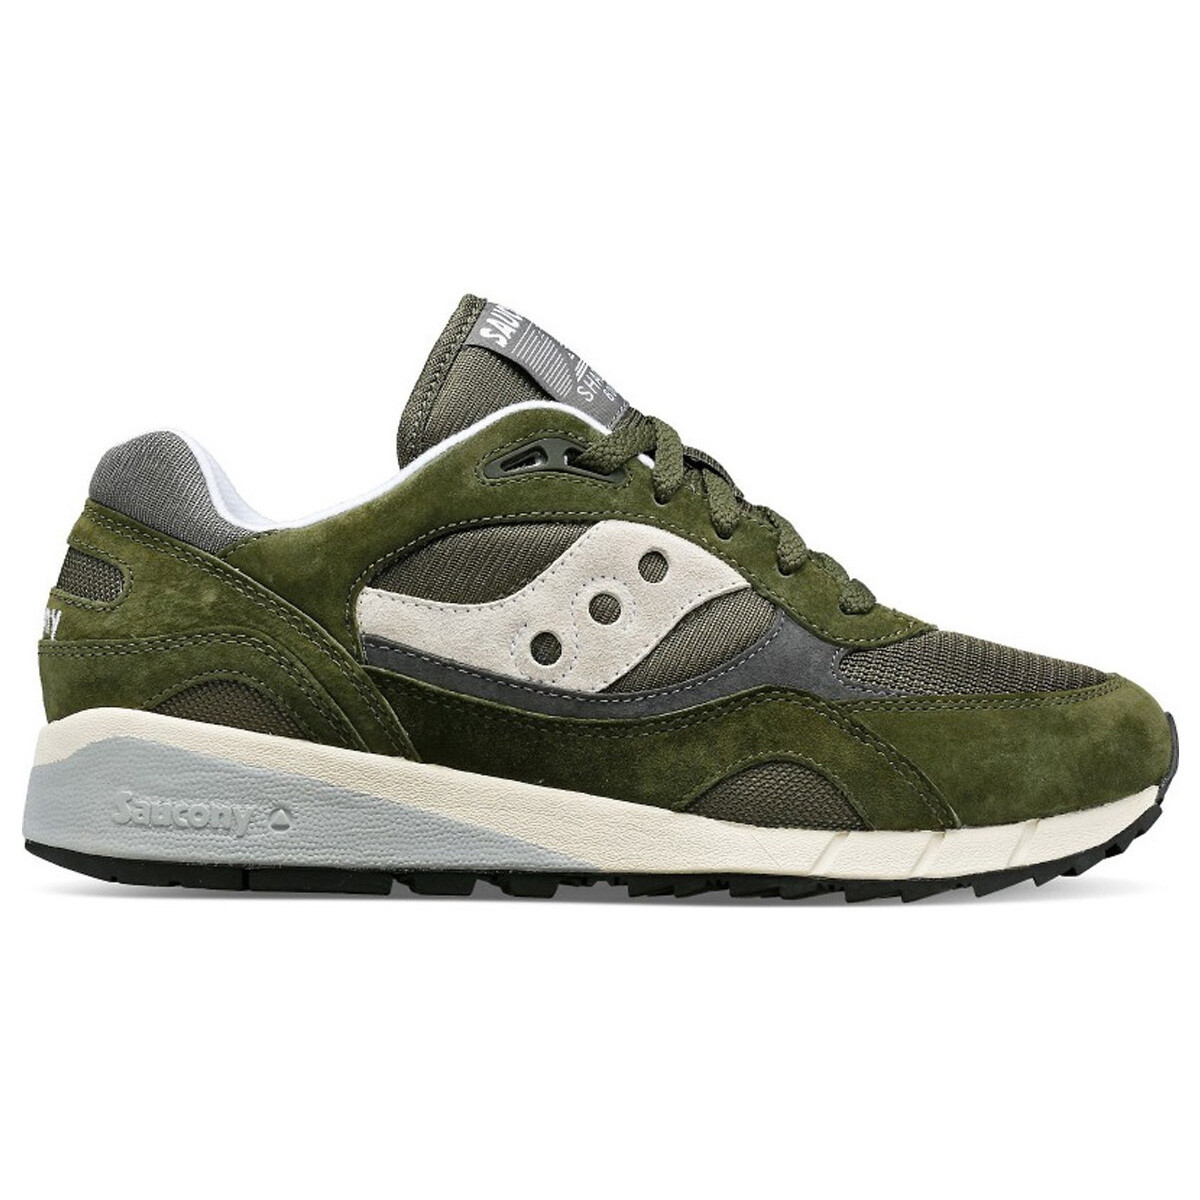 Chaussures Homme Baskets mode Saucony S70441-45 Vert